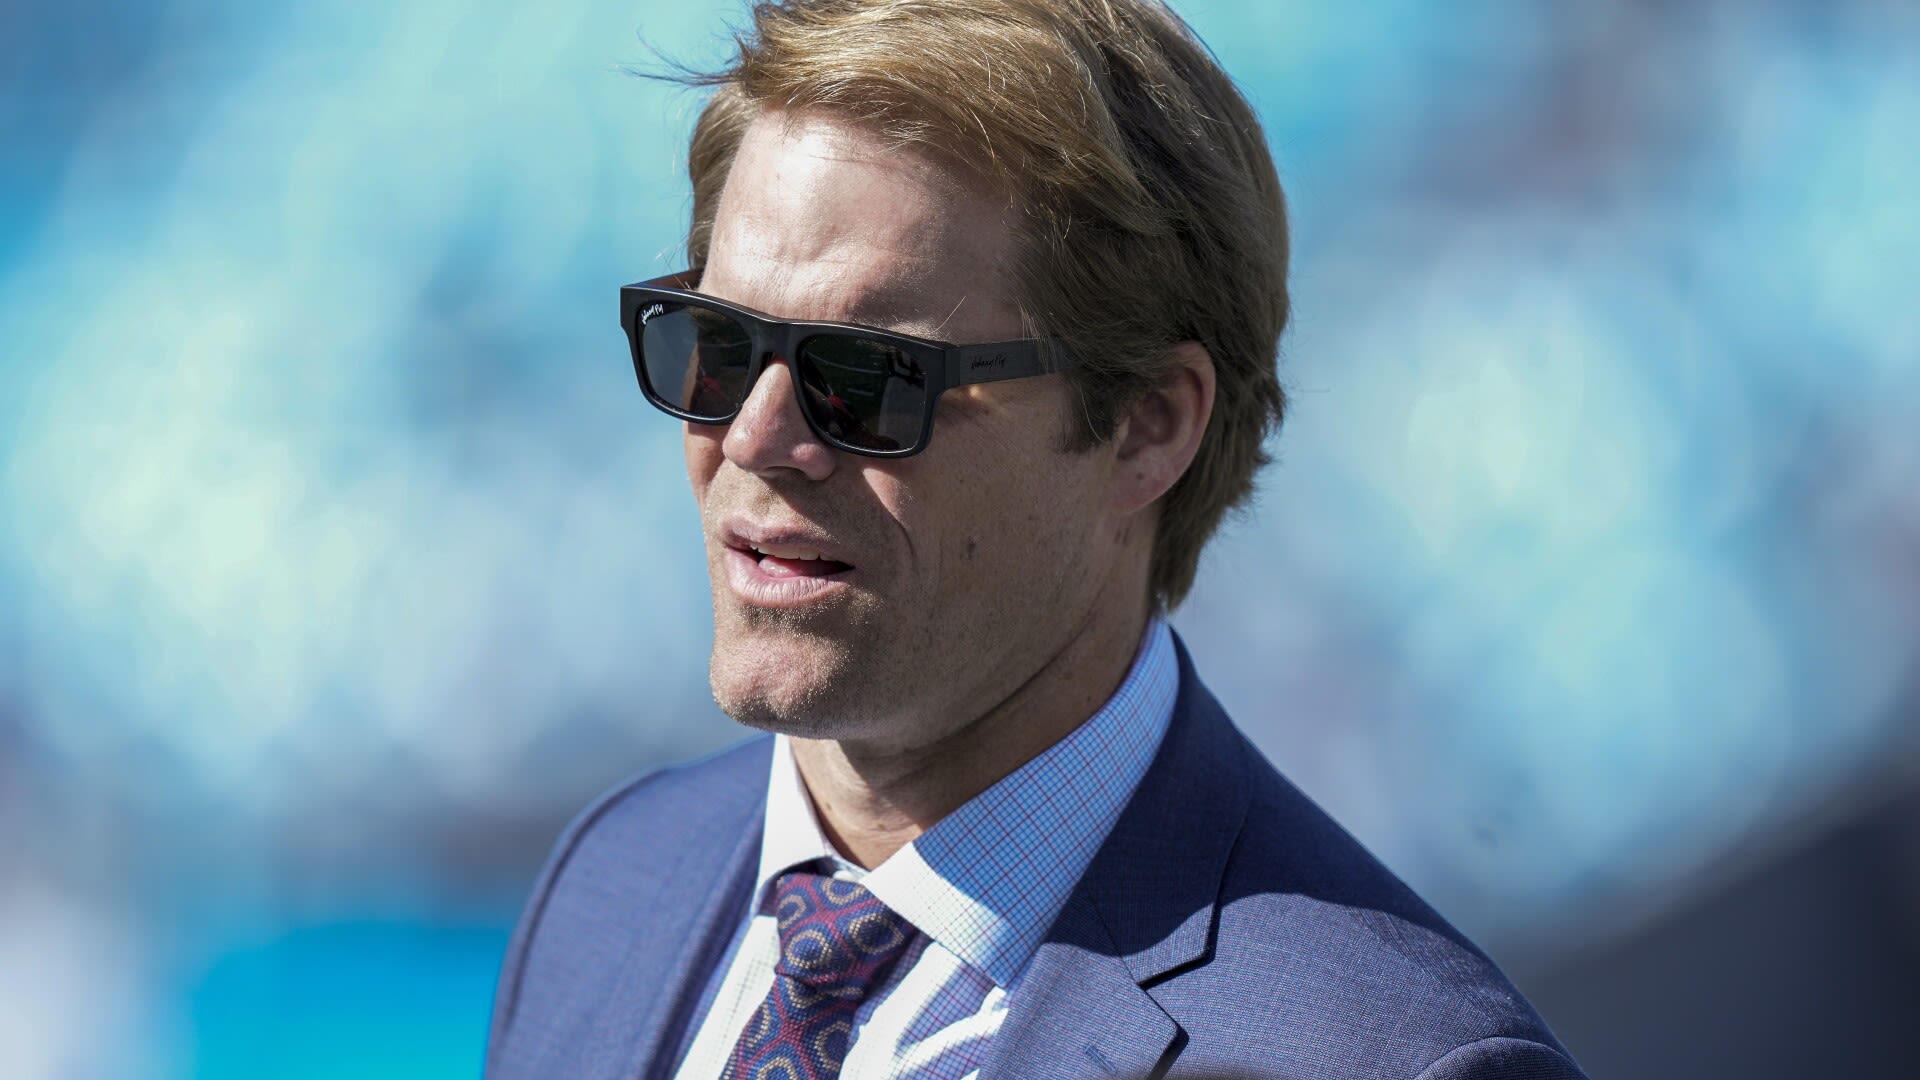 On his way out of Fox's top analyst spot for Tom Brady, Greg Olsen wins another Emmy